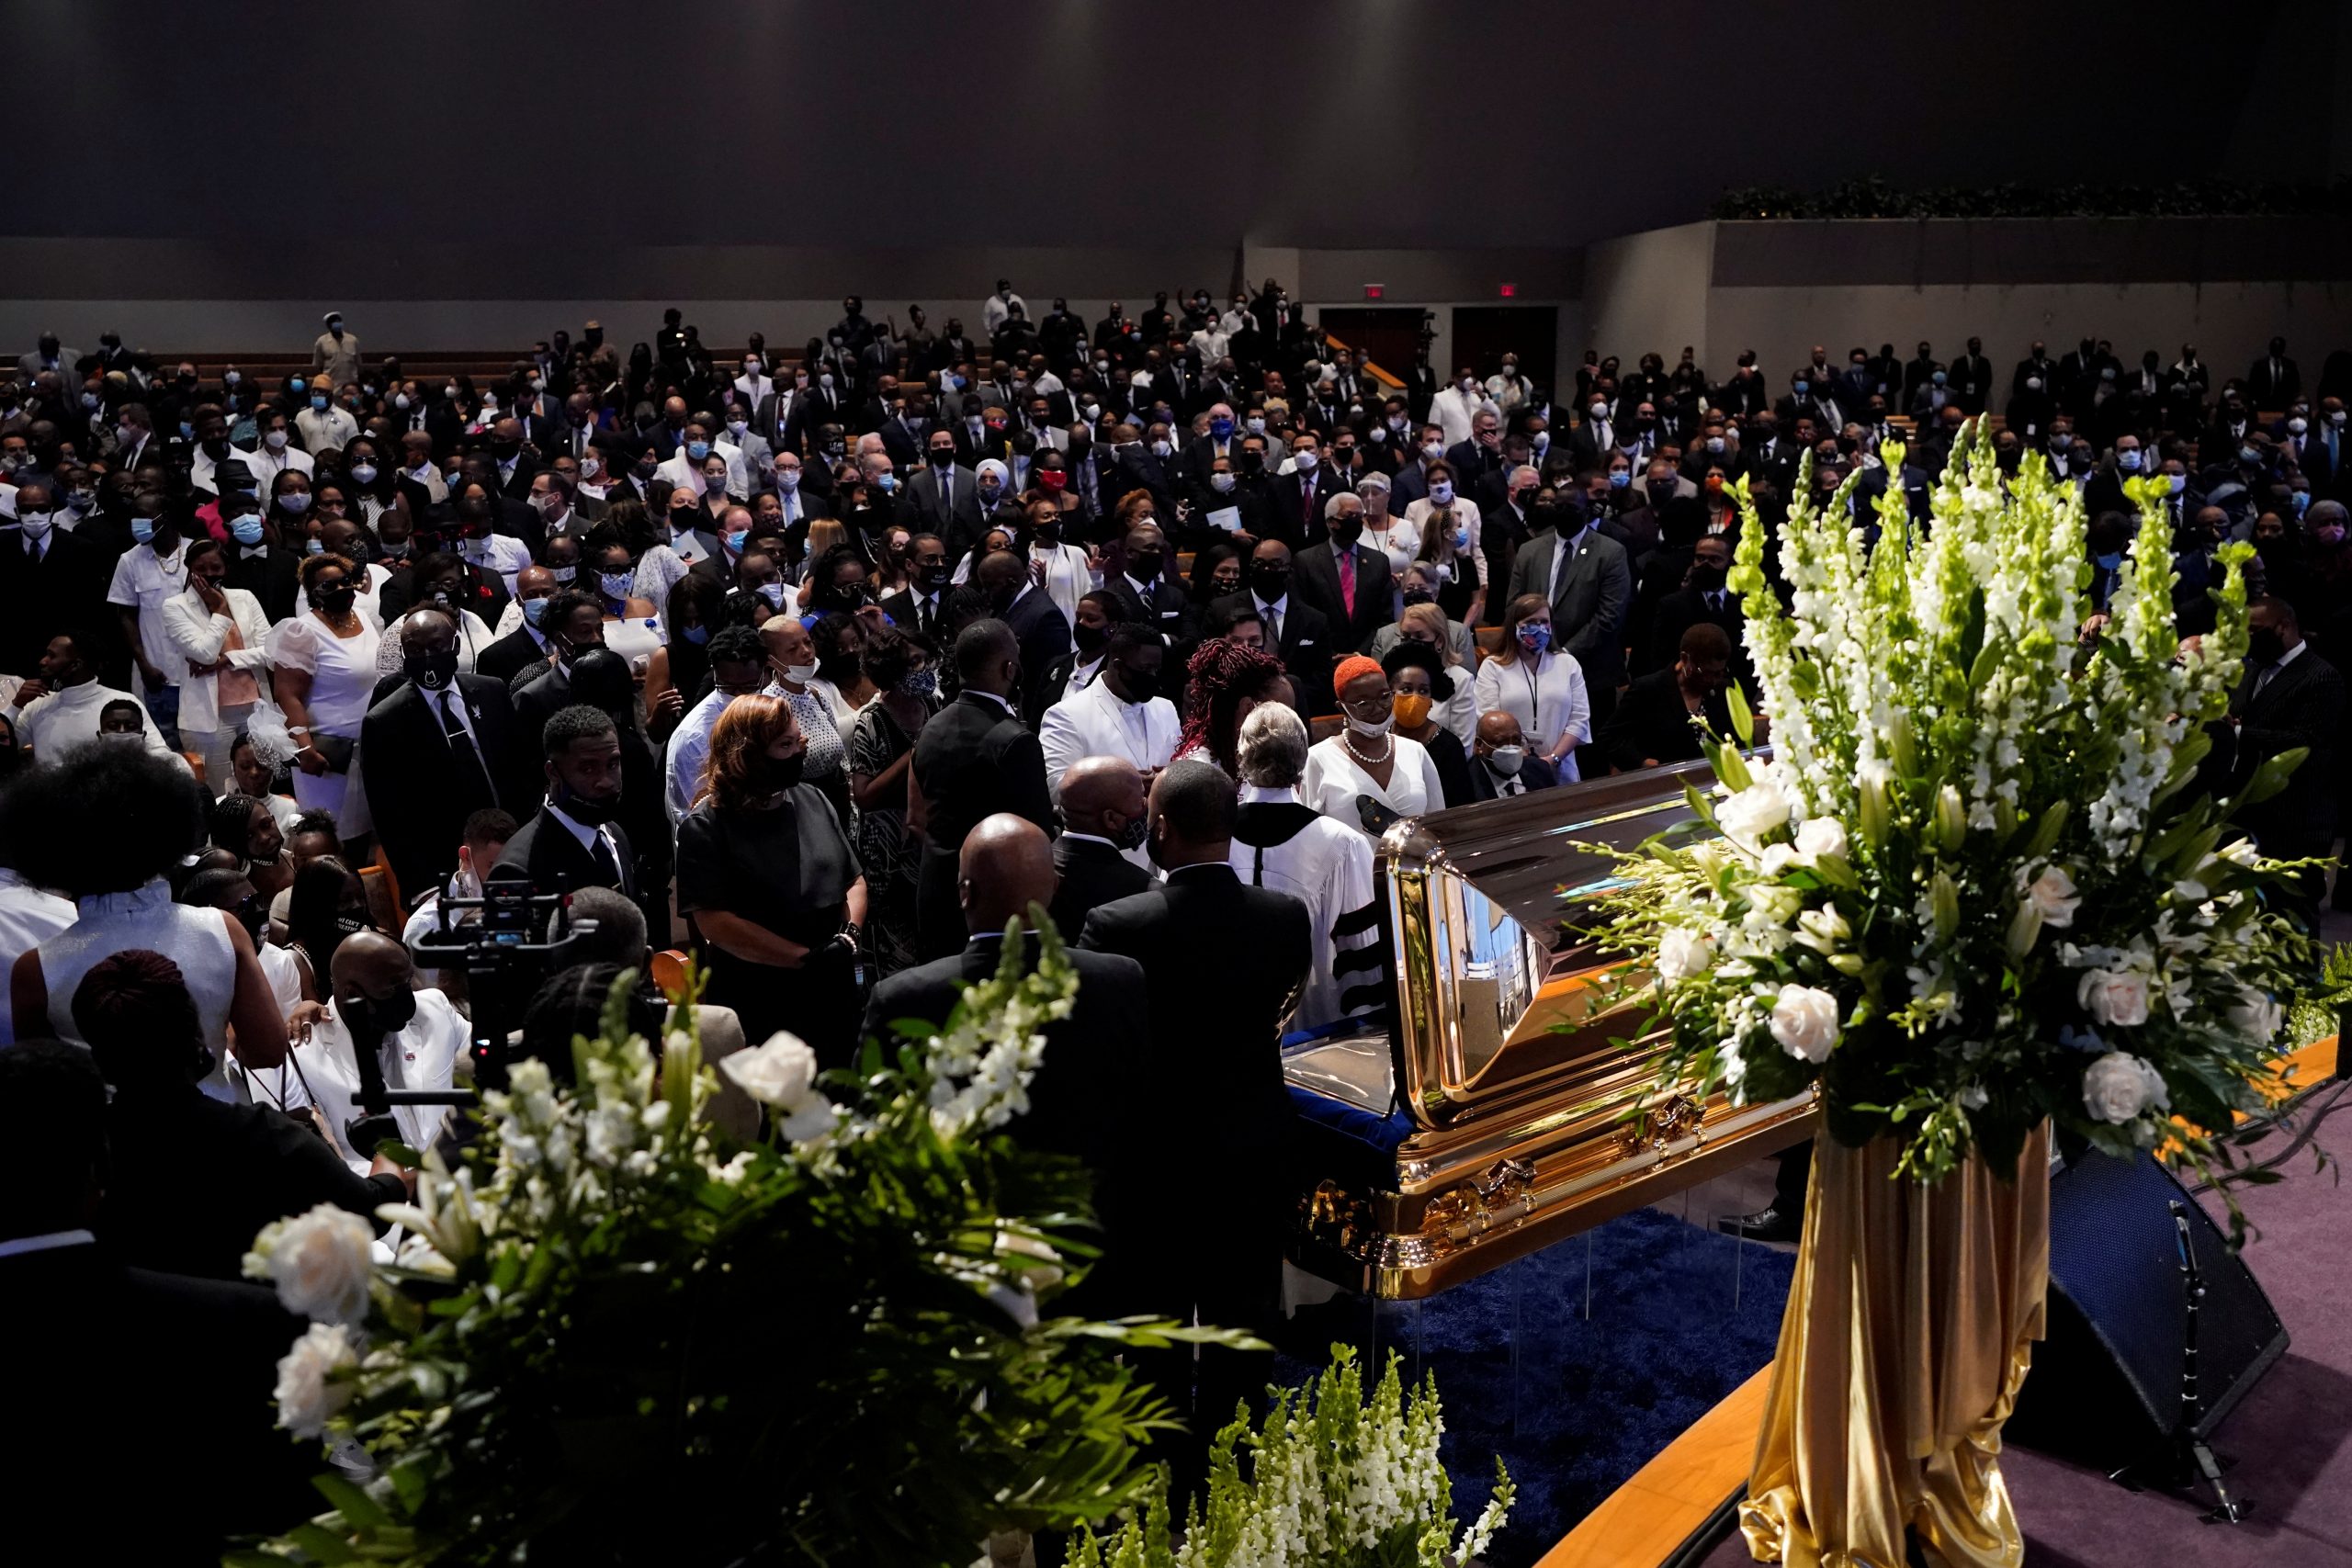 Funeral service for George Floyd at The Fountain of Praise church Family members of George Floyd pauses at the casket during a funeral service for Floyd at The Fountain of Praise church Tuesday, June 9, 2020, in Houston. David J. Phillip/Pool via REUTERS POOL